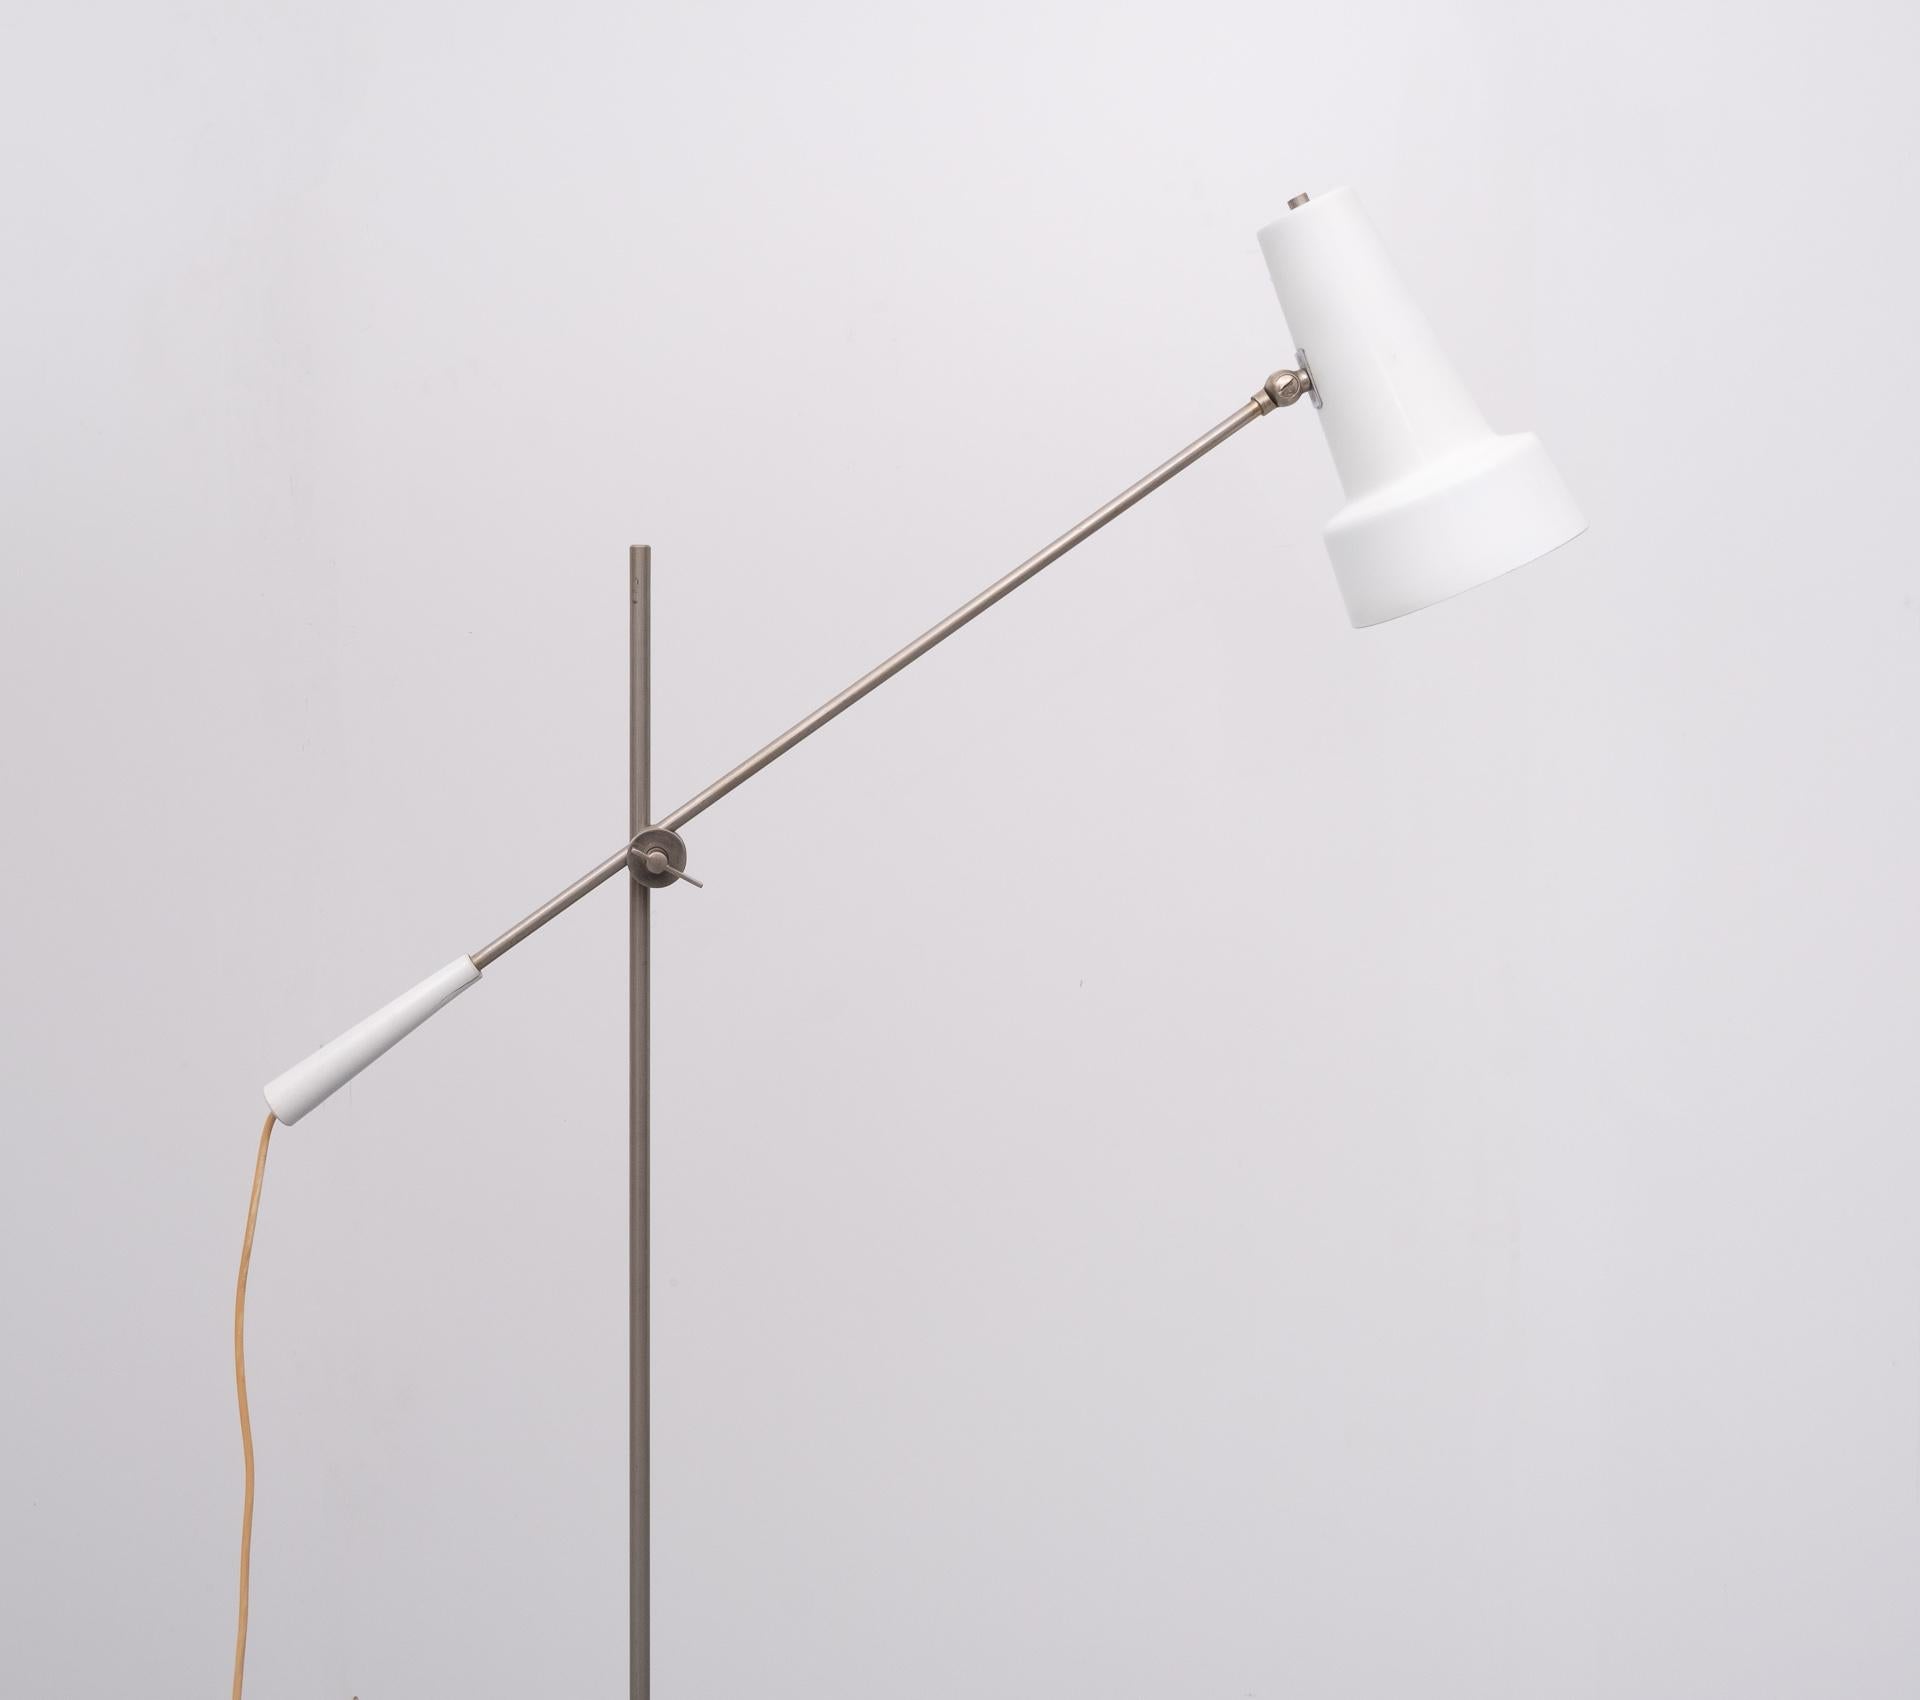 White floor lamp model 329 by Willem Hagoort for Hagoord lighting Rotterdam, Holland, 1960. Adjustable in all directions for direct or indirect lighting. Considering its age this vintage floor lamp is still in good condition with traces of use and